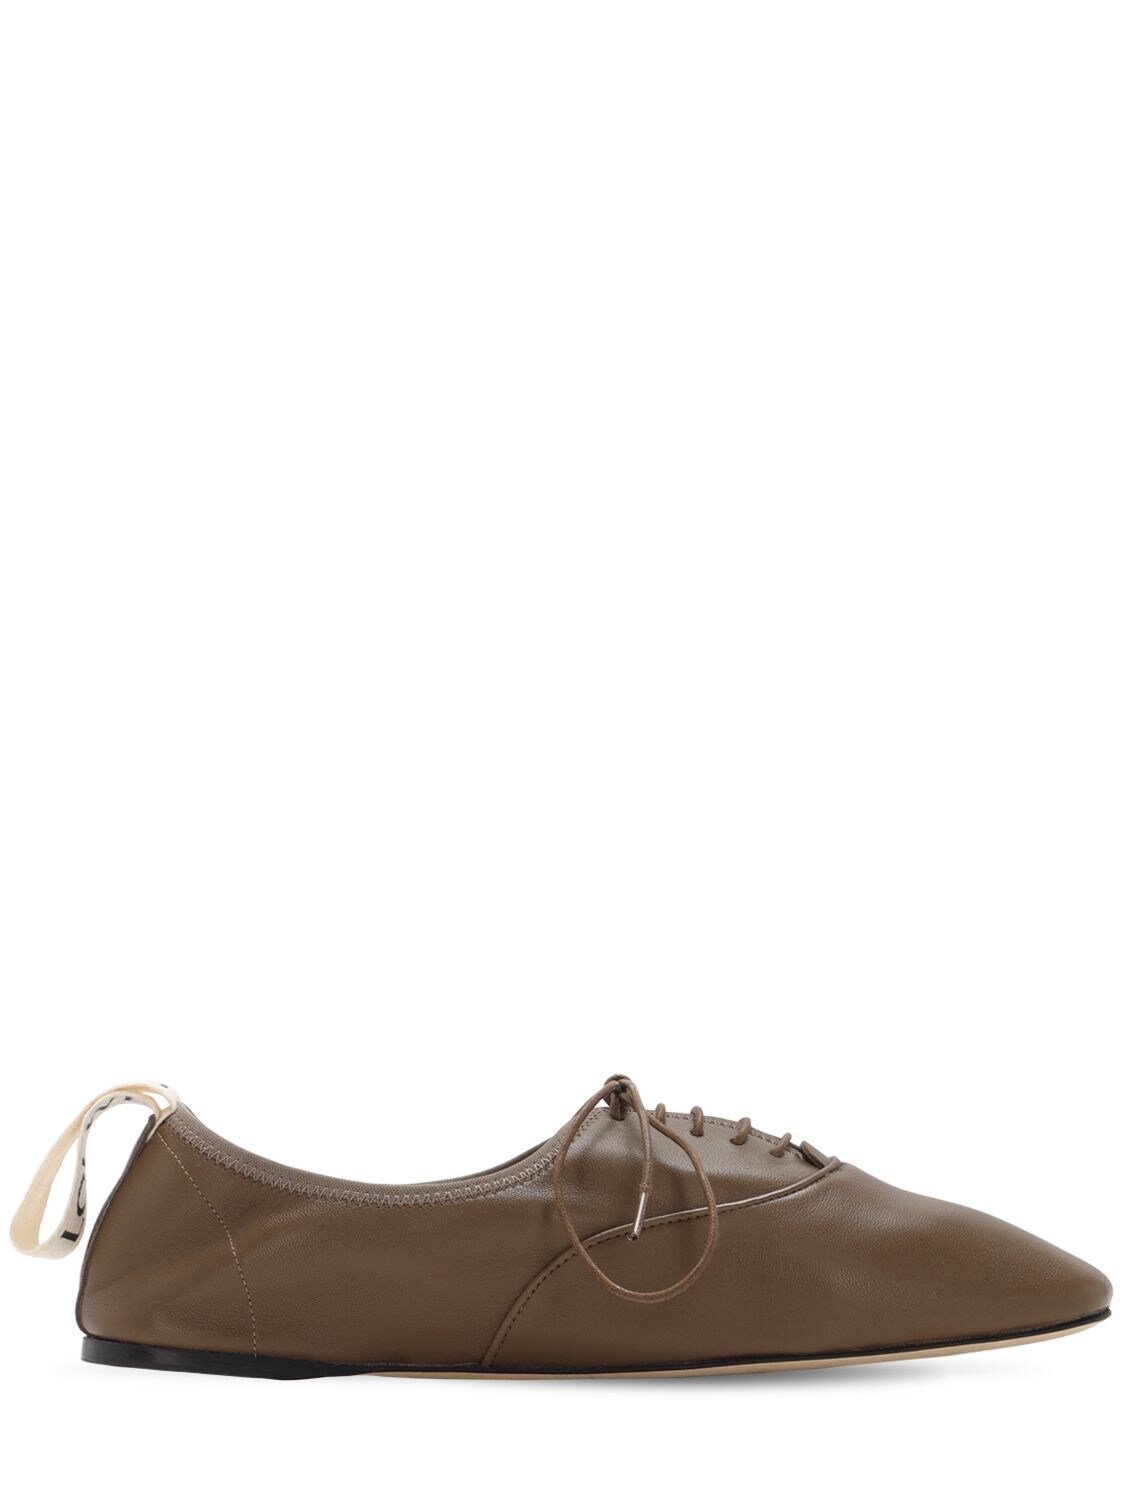 LOEWE 10MM SOFT LEATHER LACE-UP DERBY FLATS,70IWAS004-NDE2MA2